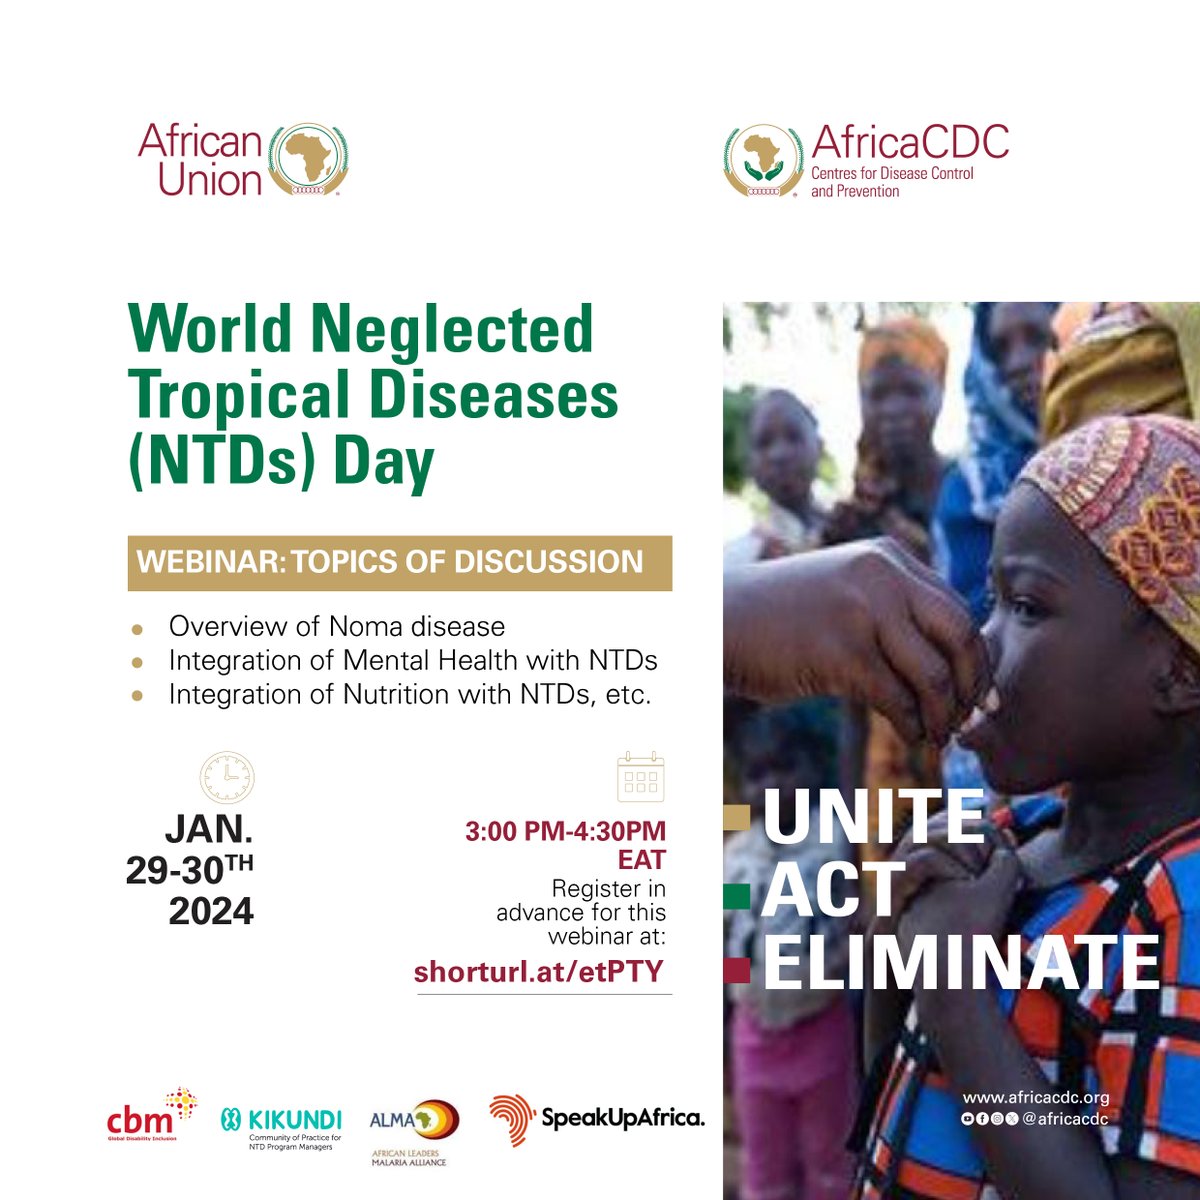 Today is World Neglected Tropical Diseases Day (#NTDs). Join us for this special webinar on #NTDs. 📅 30.01.2024 ⏰ 2:00 pm - 4:30 pm 🔗 shorturl.at/etPTY